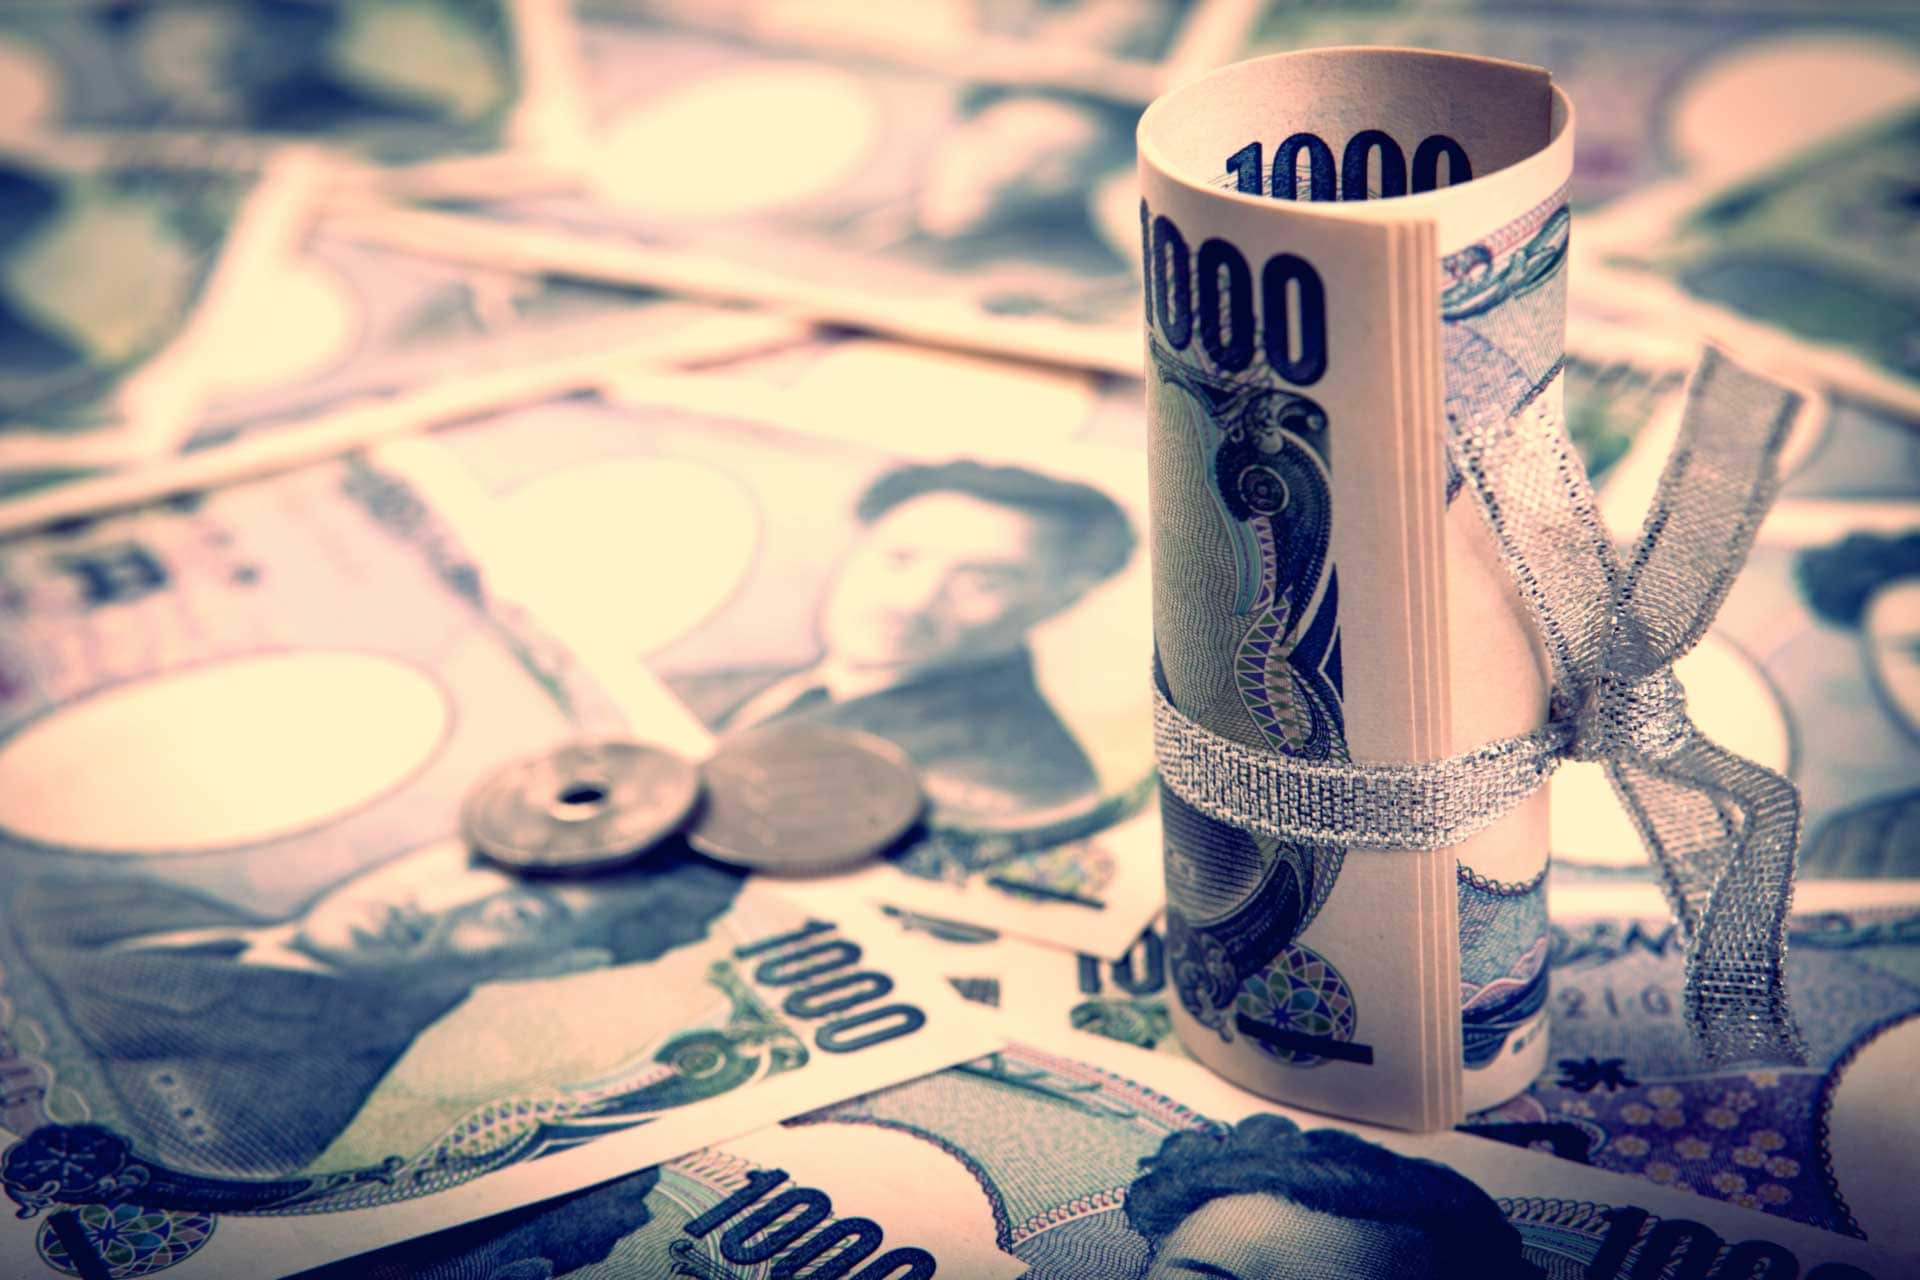 FX Update: JPY strength continues under the radar